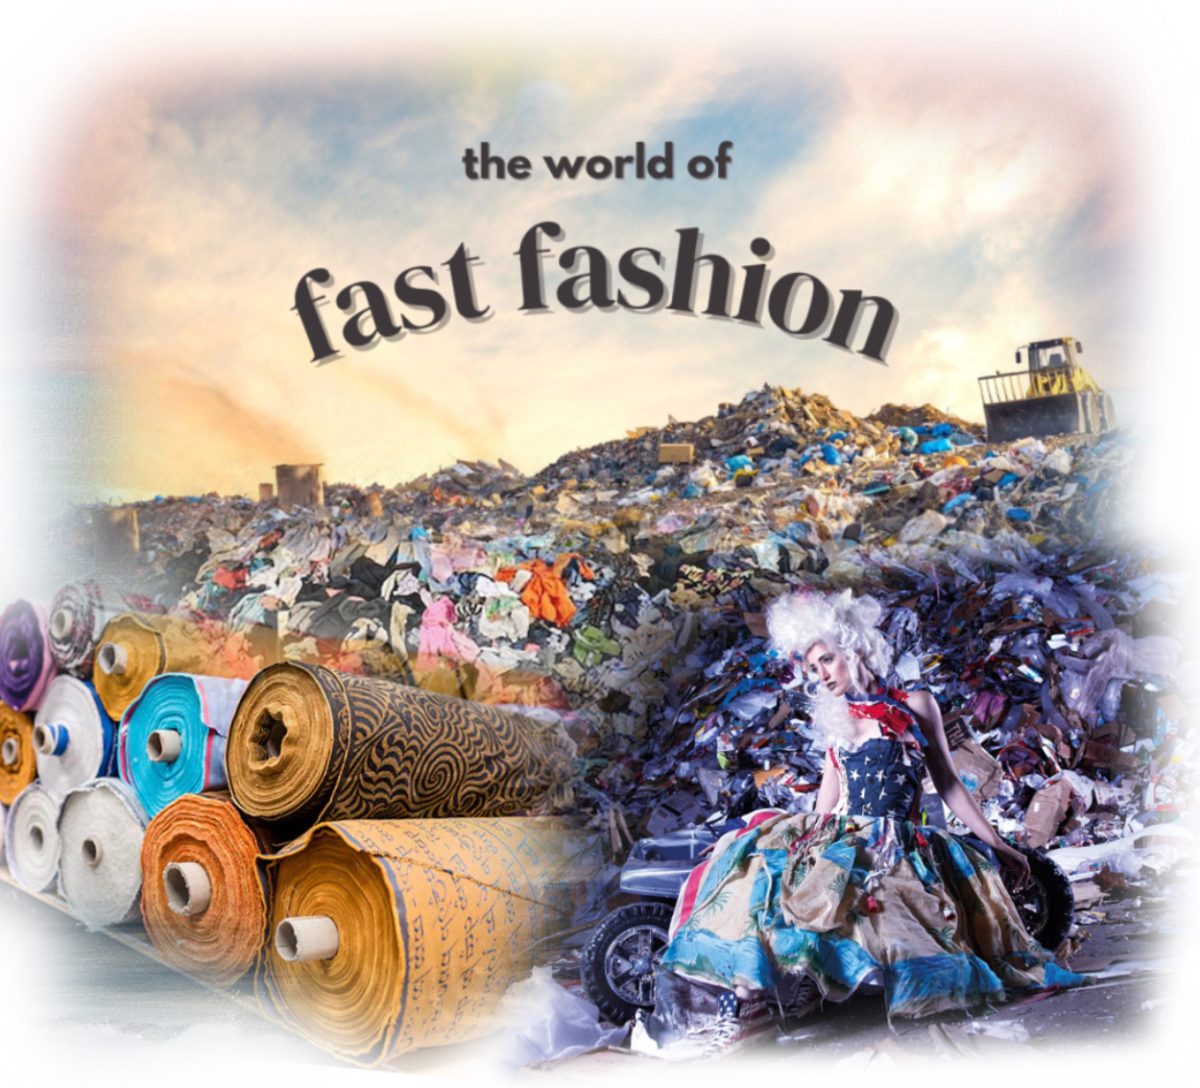 This photo Illustration reflects the existence of land fills and the hope for more sustainable fabrics.